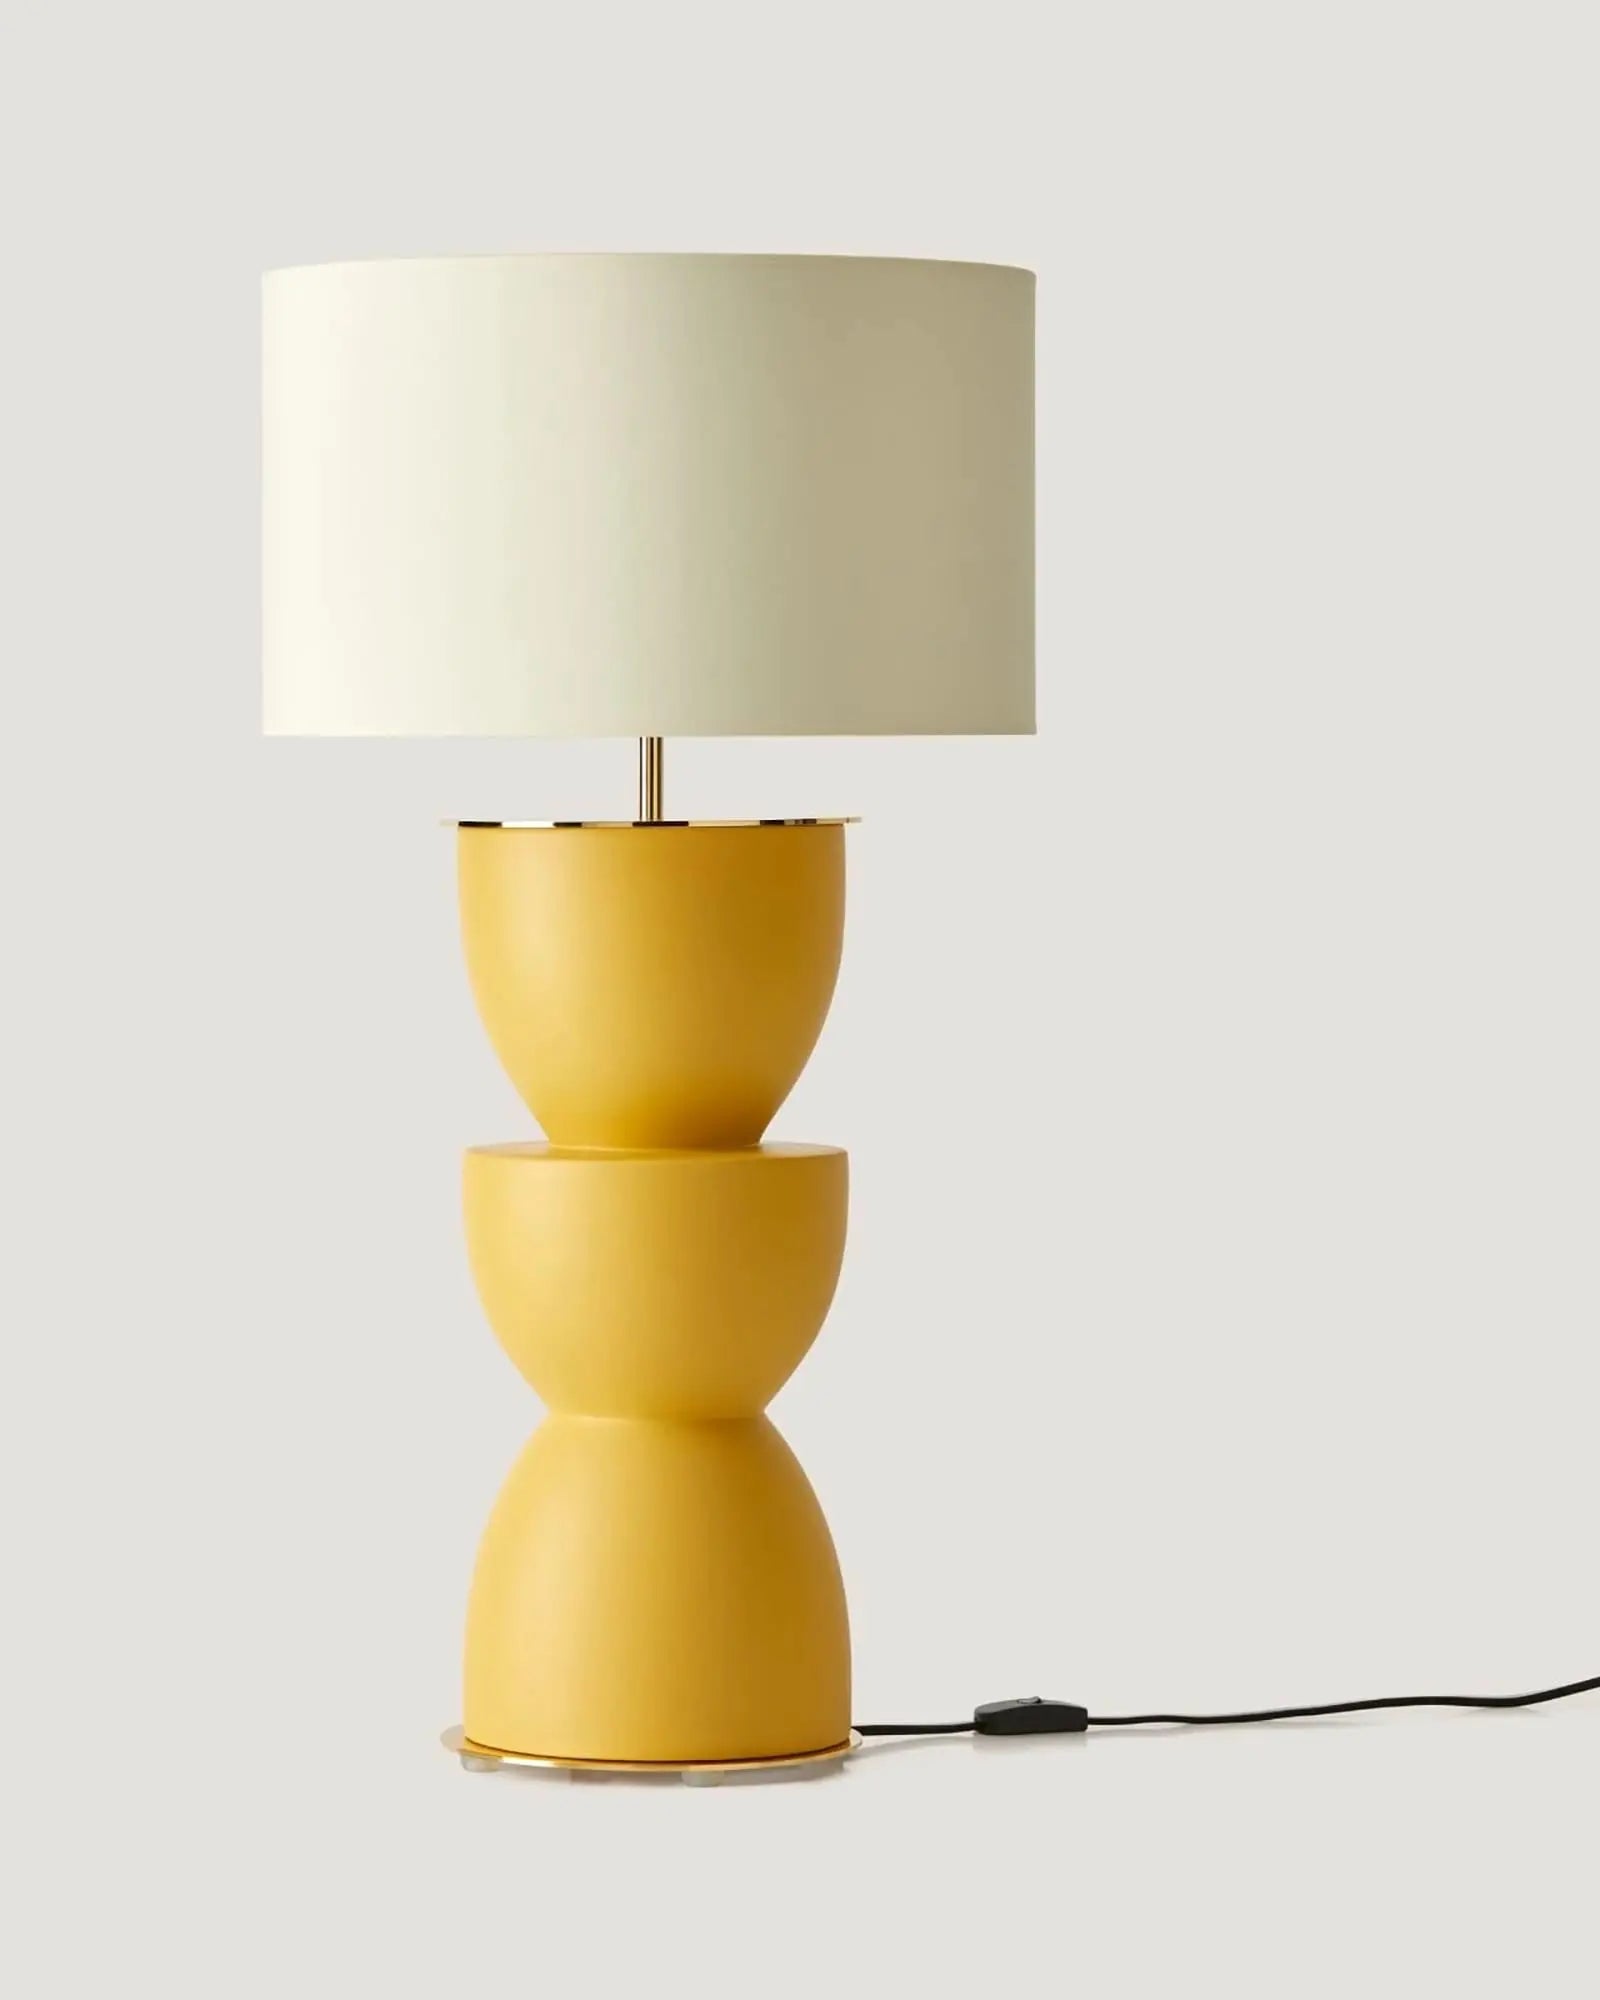 Metric Ceramic and fabric shade decorative table lamp product photo